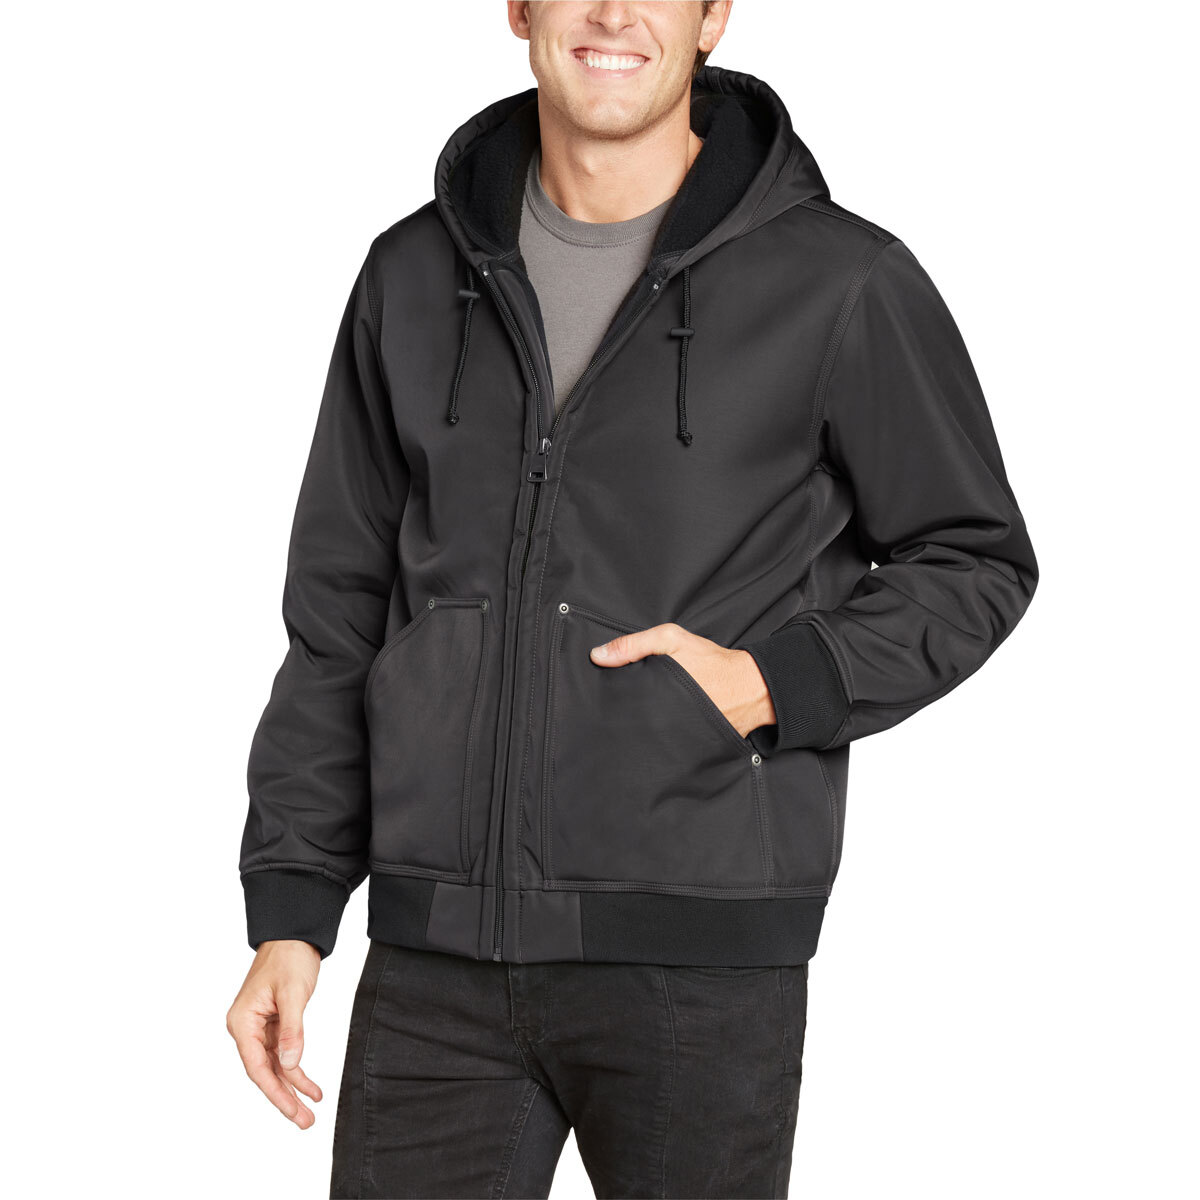 Kirkland Signature Men's Heavy Duty Hooded Work Jacket in 2 Colours and ...